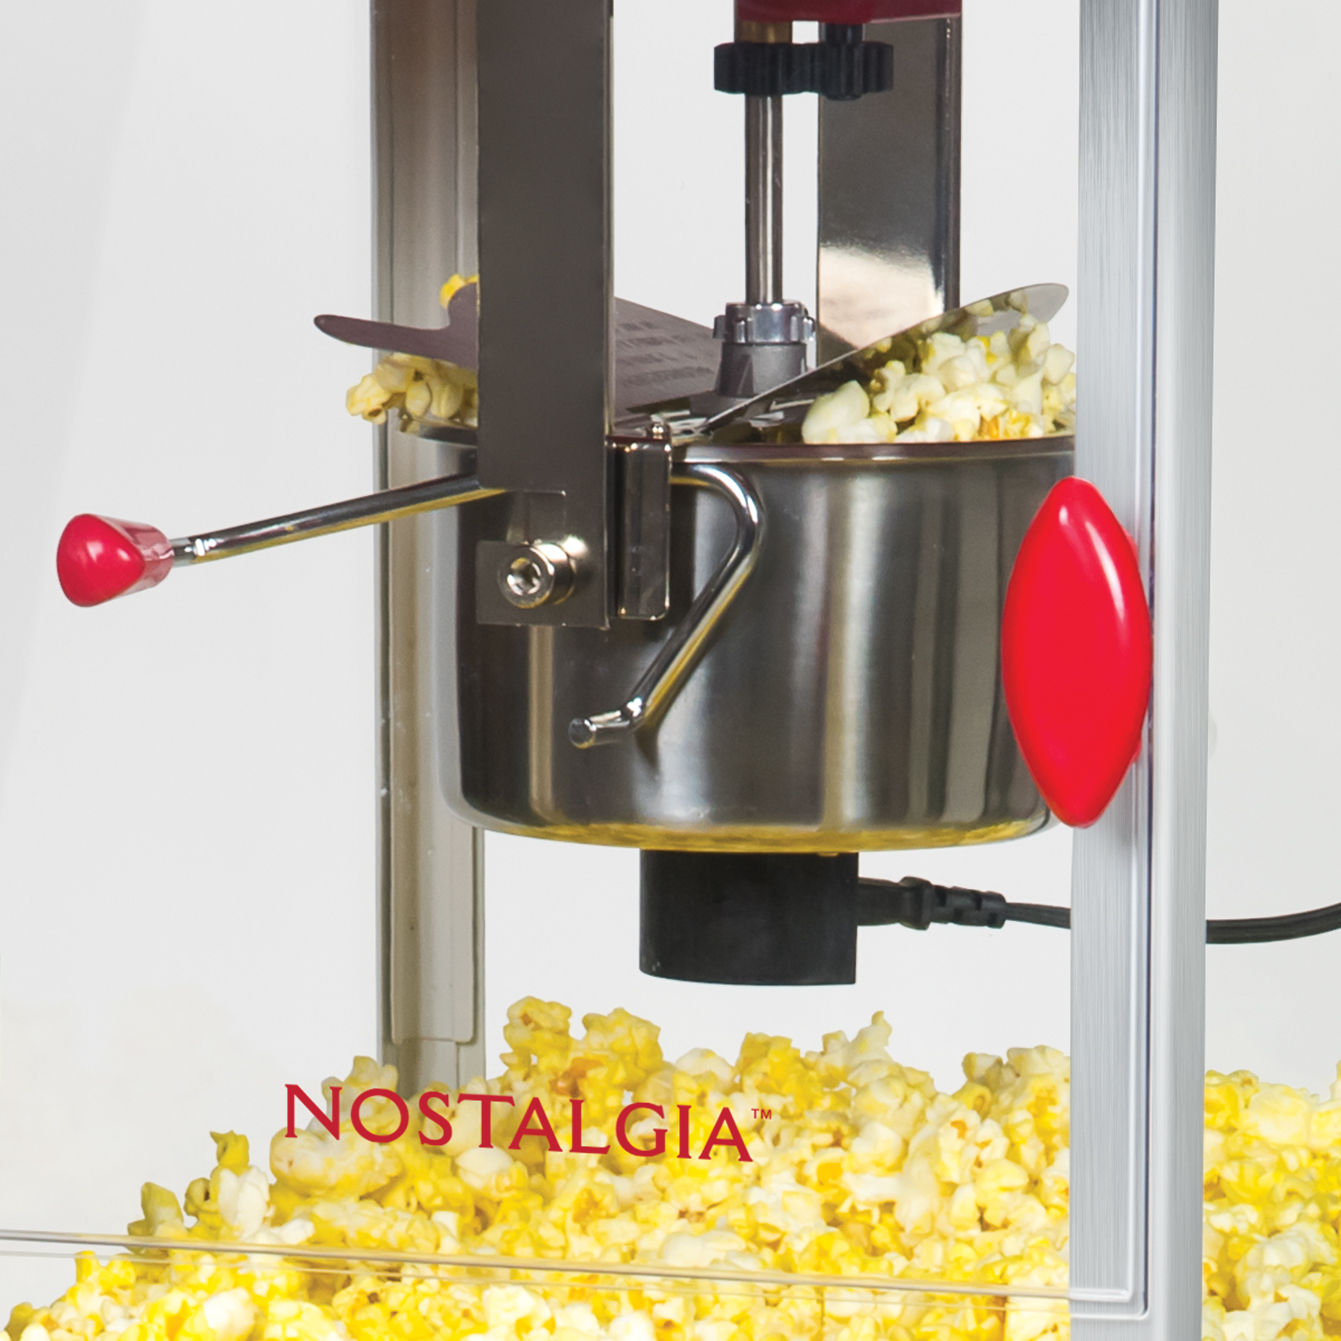 Nostalgia 2.5 oz Popcorn Cart, Makes 10 Cups, 48 in Tall, Red, White, CCP399 - image 3 of 6